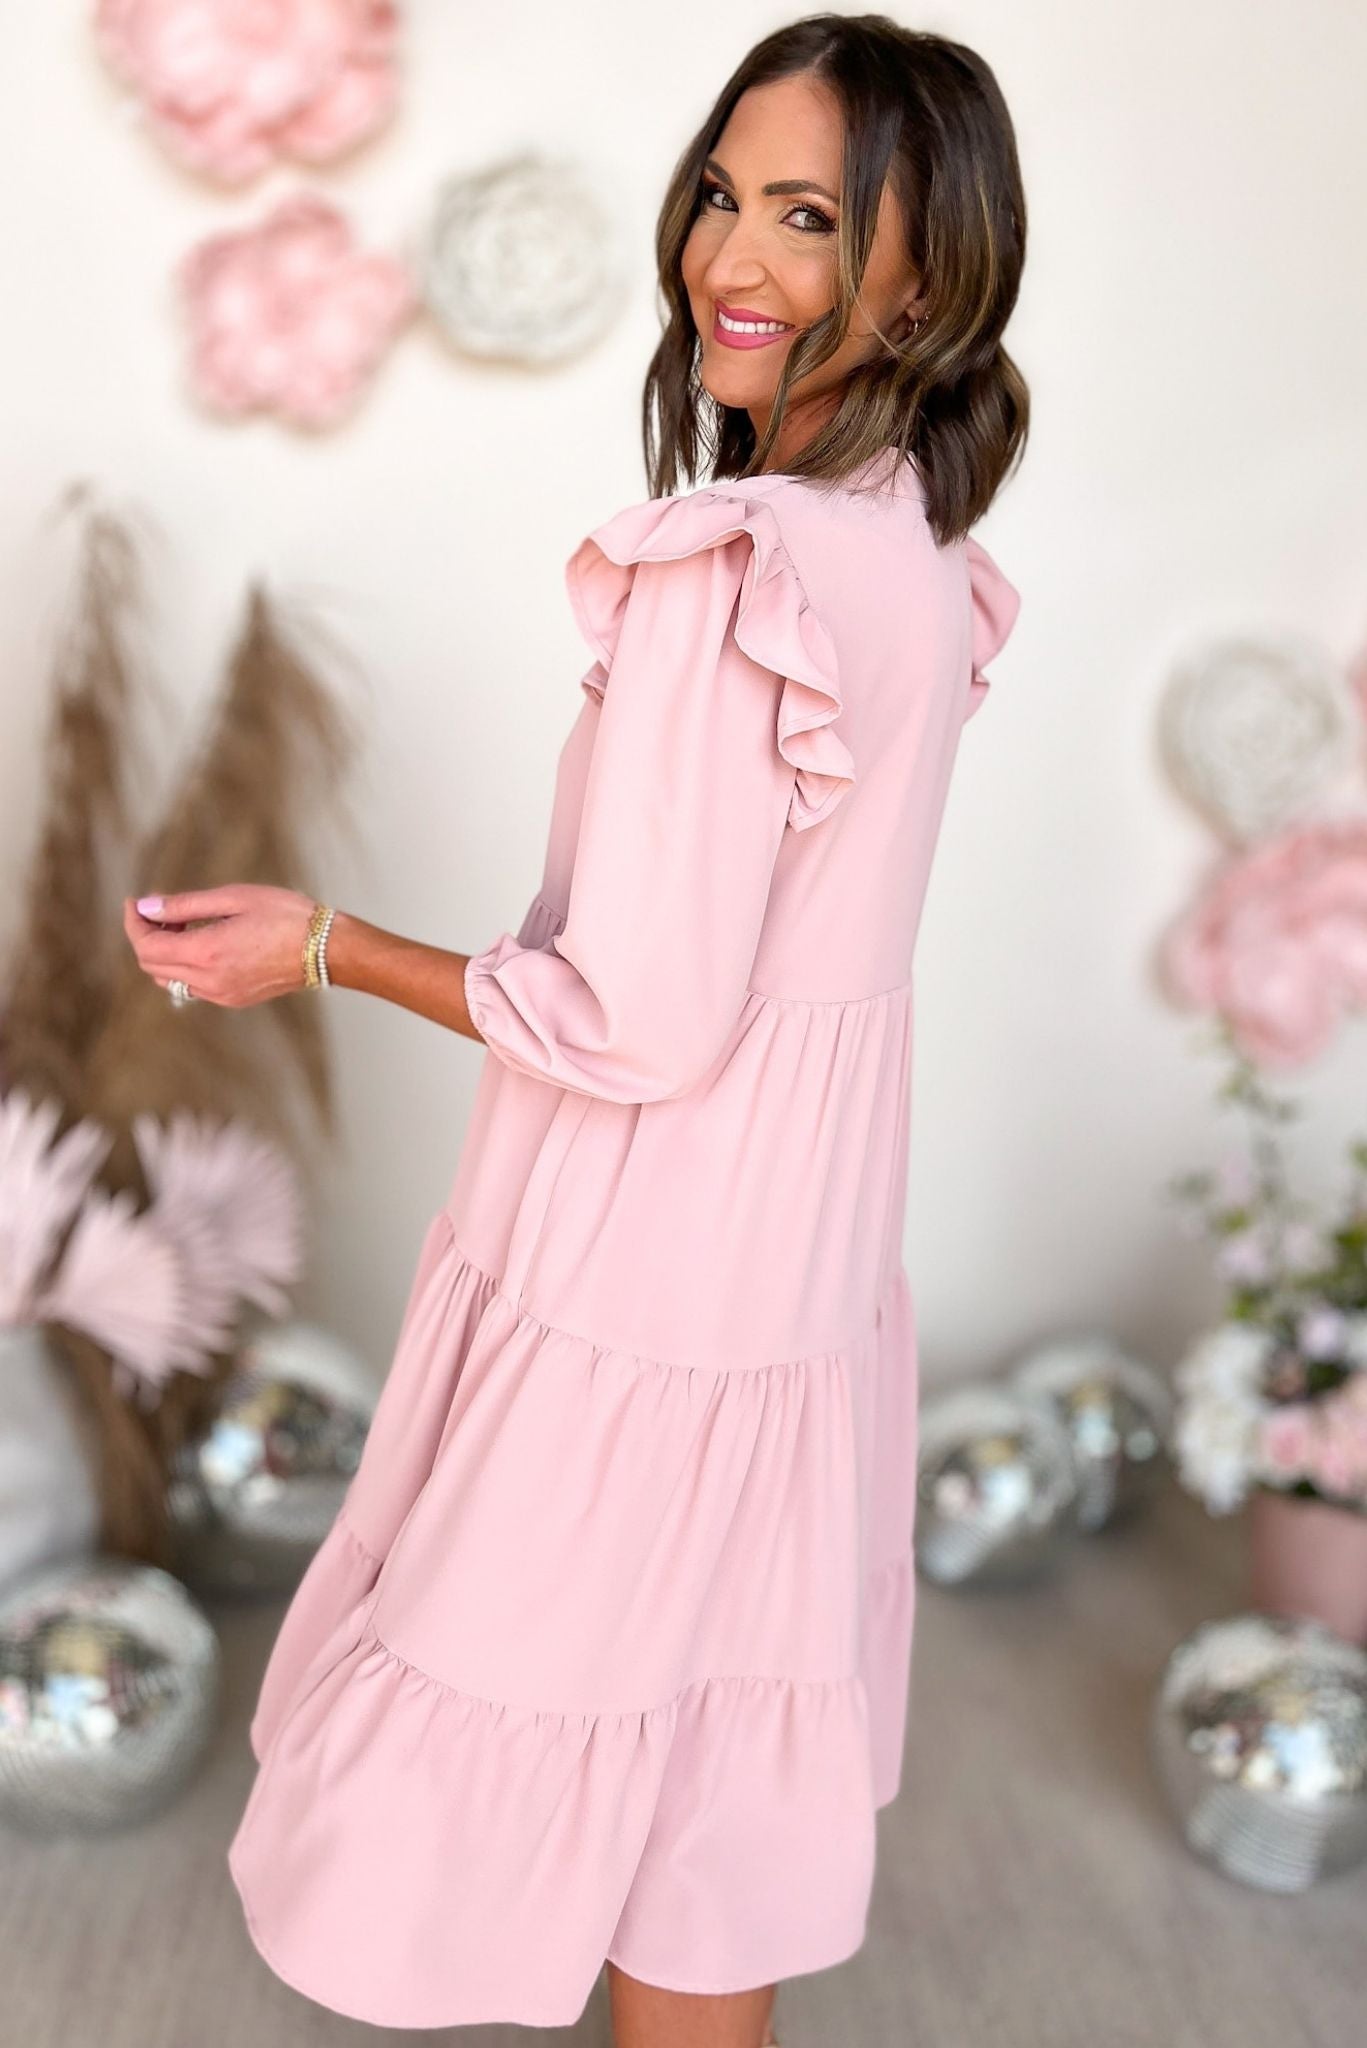 SSYS Blush Three Quarter Sleeve Ruffle Shoulder Tiered Midi Dress, shift dress, midi, spring must have, spring fashion, mom style, shop style your senses by mallory fitzsimmons